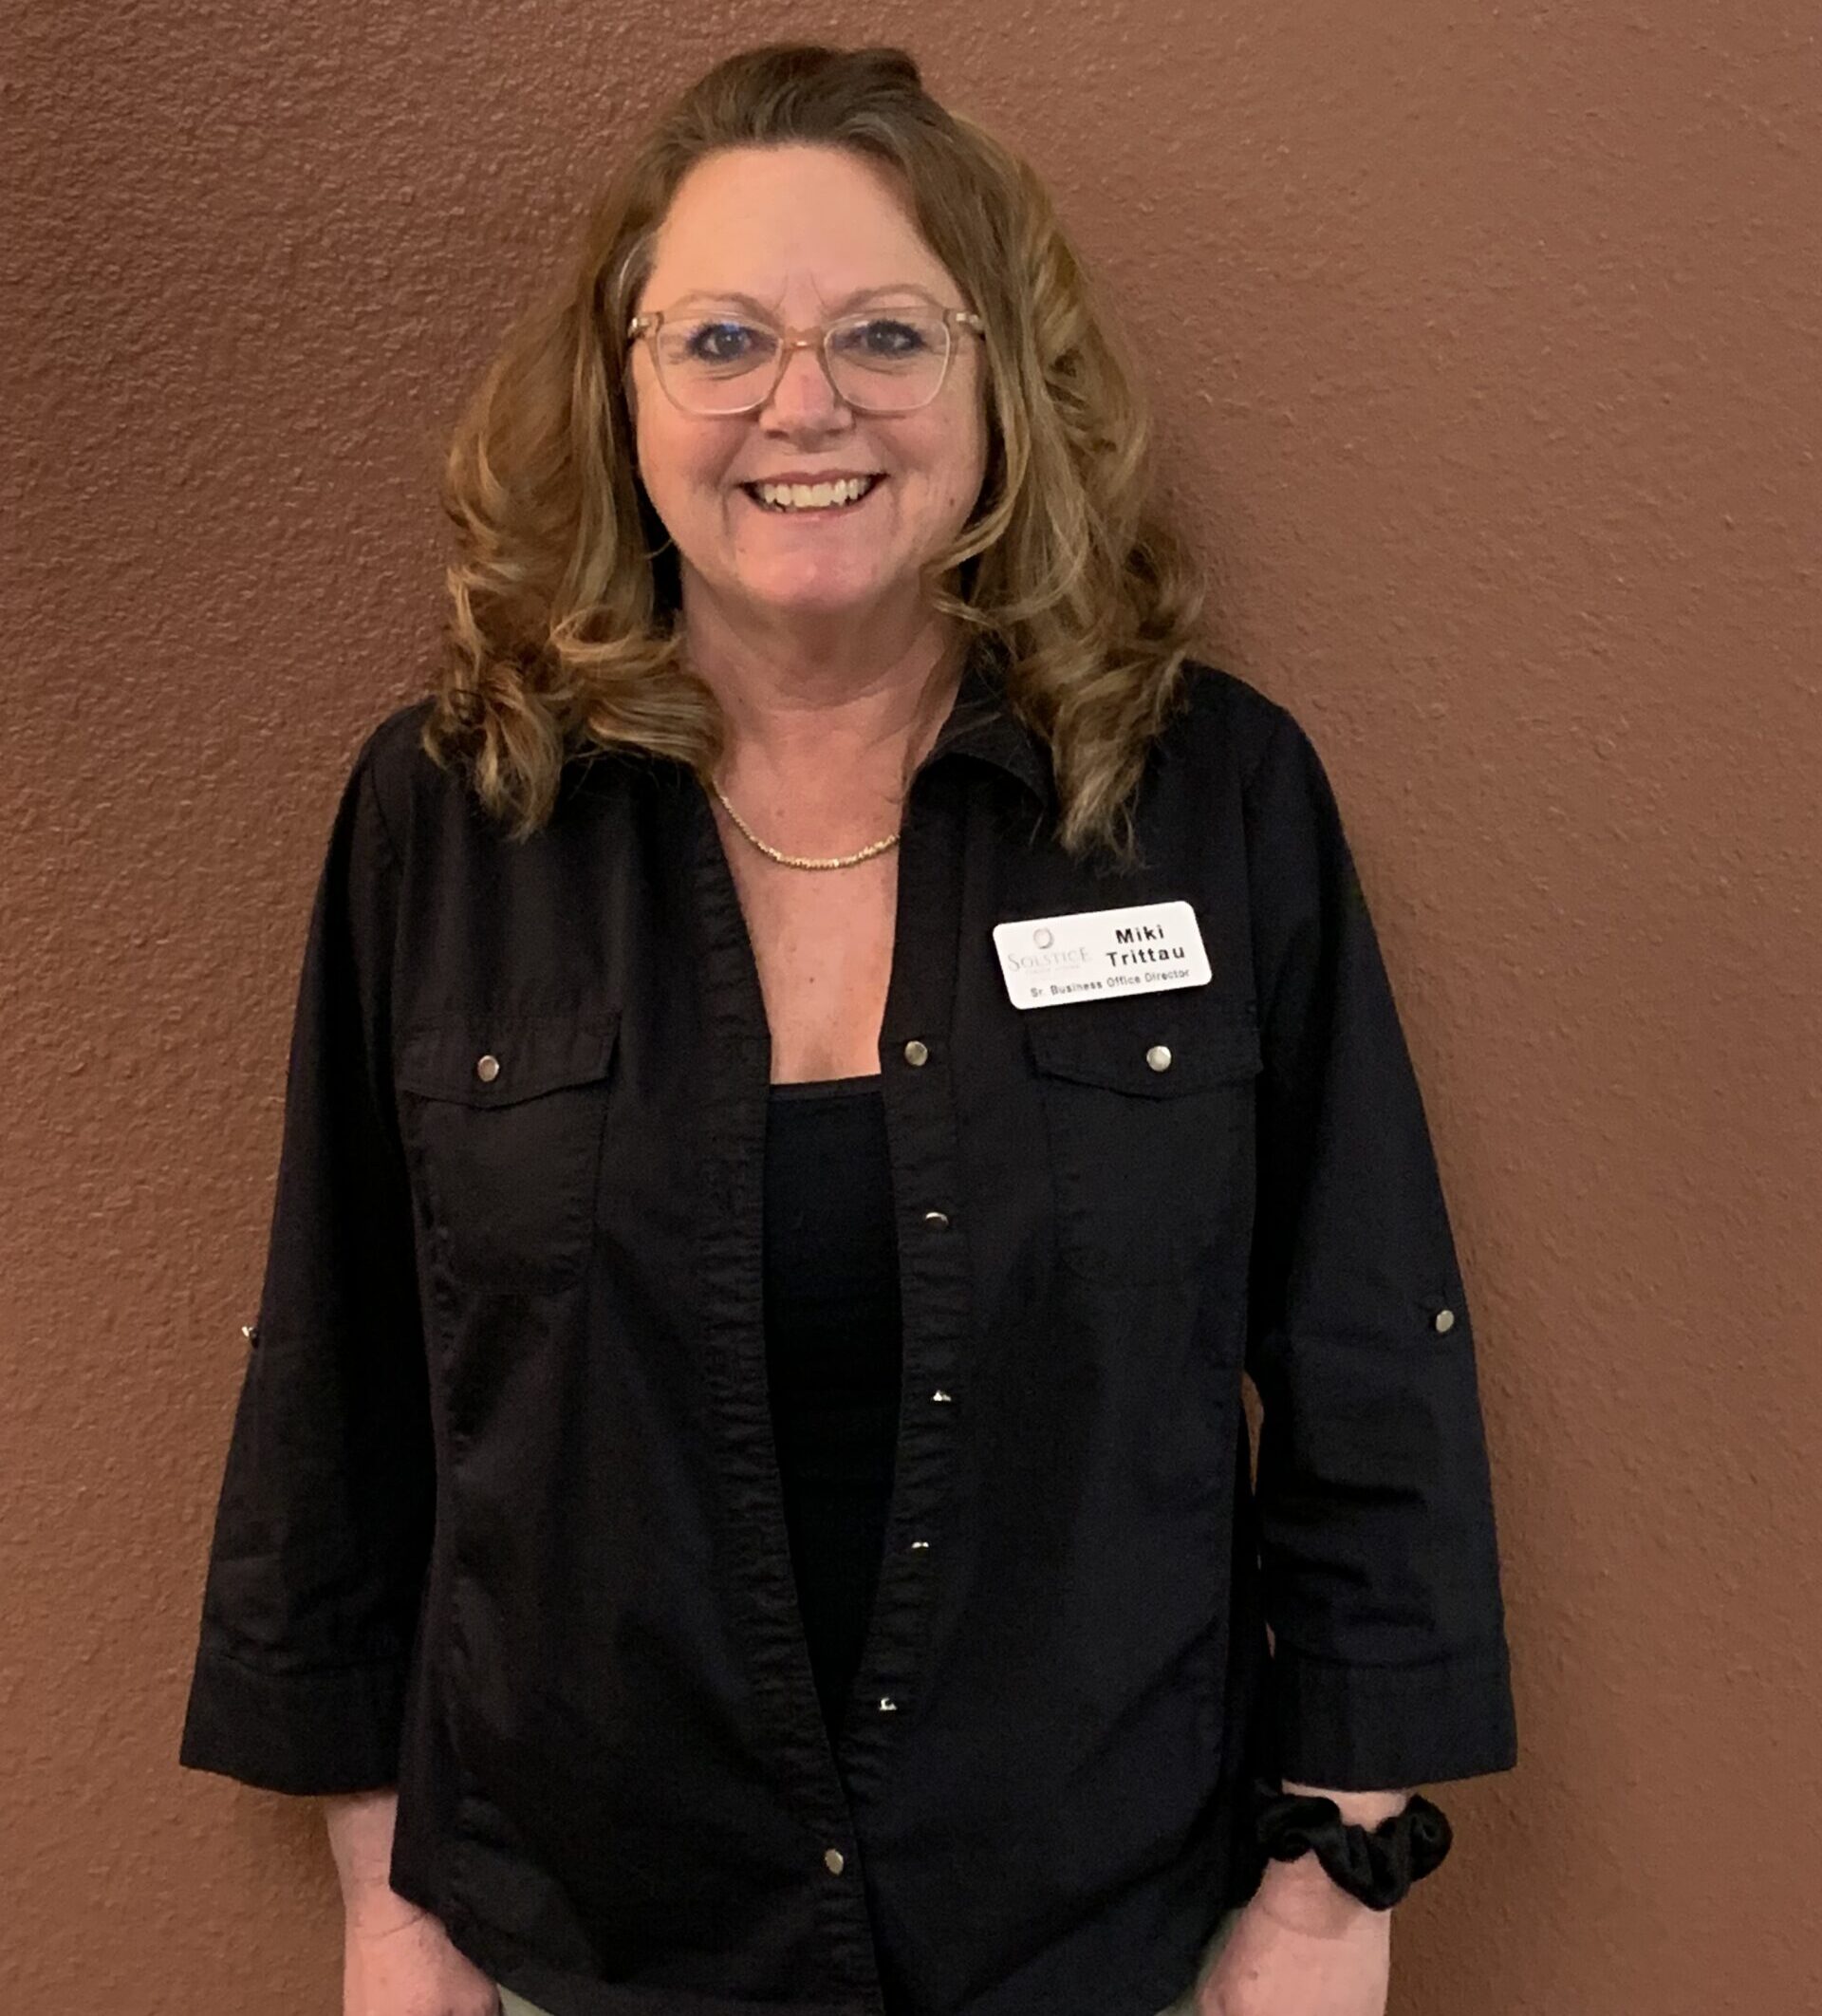 Michele "Miki" Trittau, Business Office Director, Solstice at Grand Valley